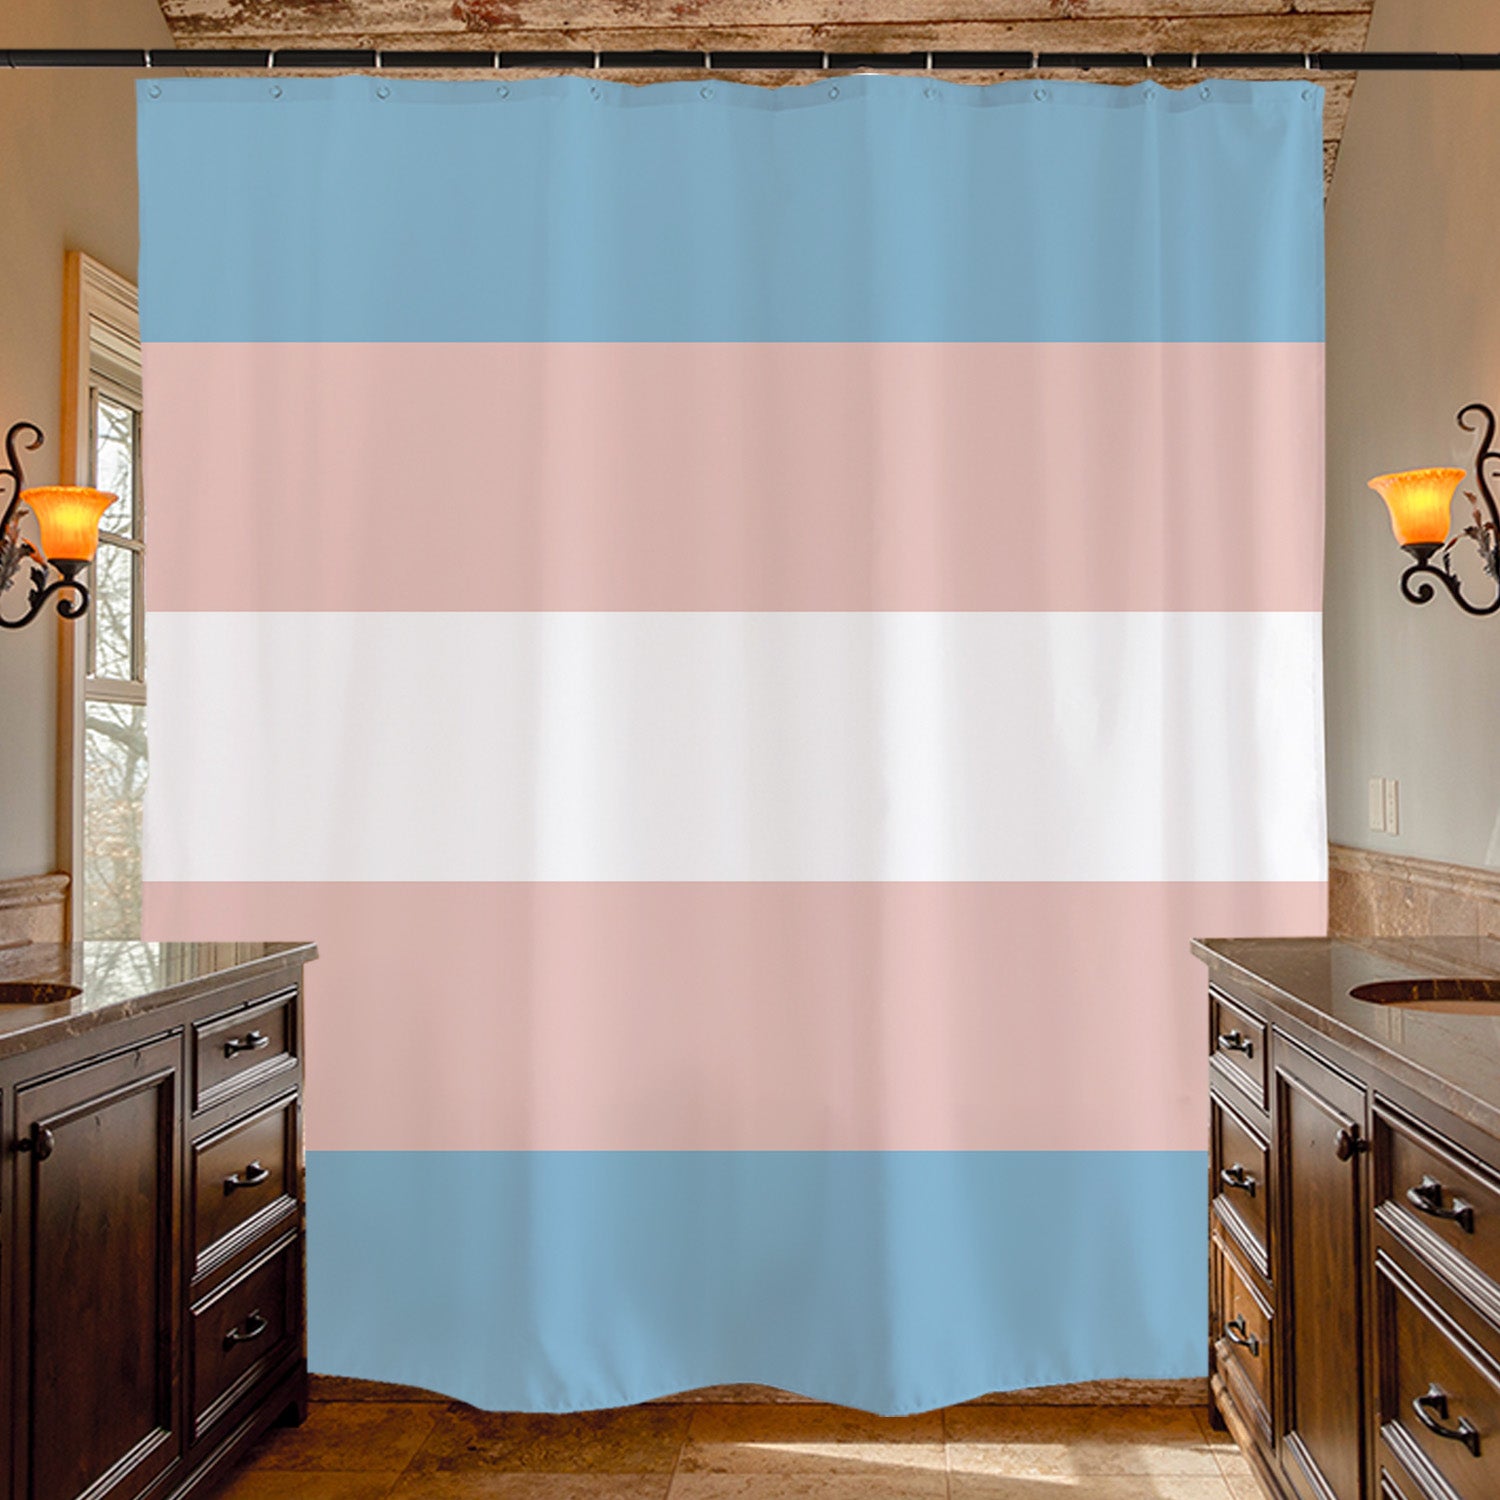 Feblilac Pink Blue White LGBT Flag Shower Curtain with Hooks